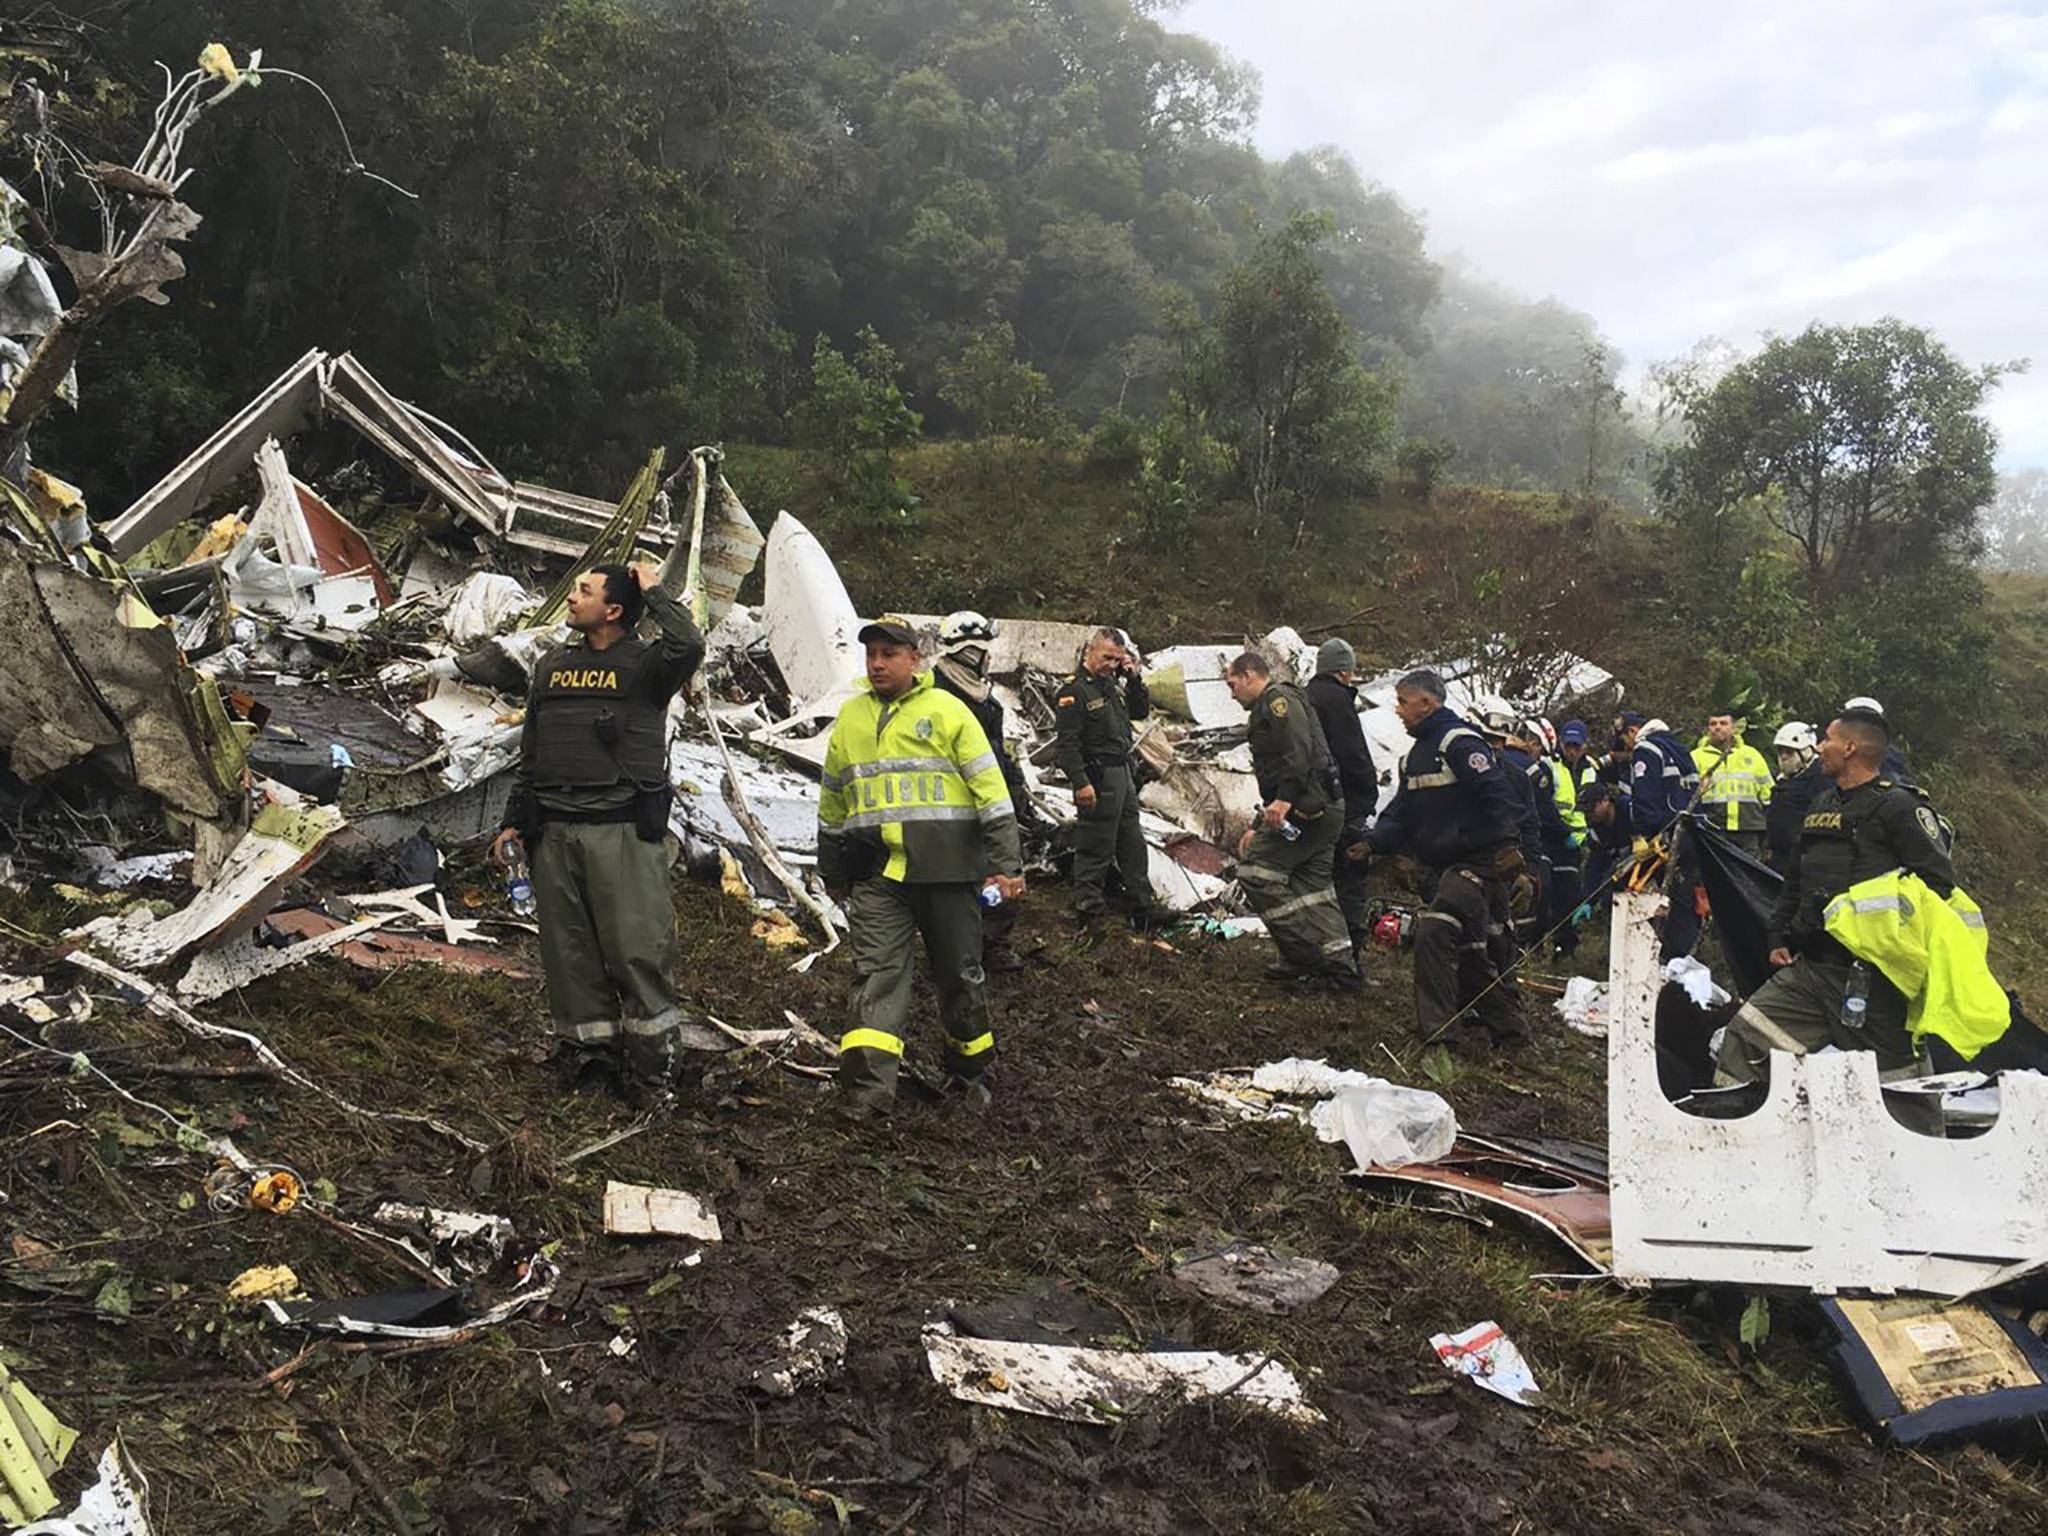 Rescue teams work at the site of a chartered airplane that crashed in La Union, a mountainous area outside Medellin, Colombia